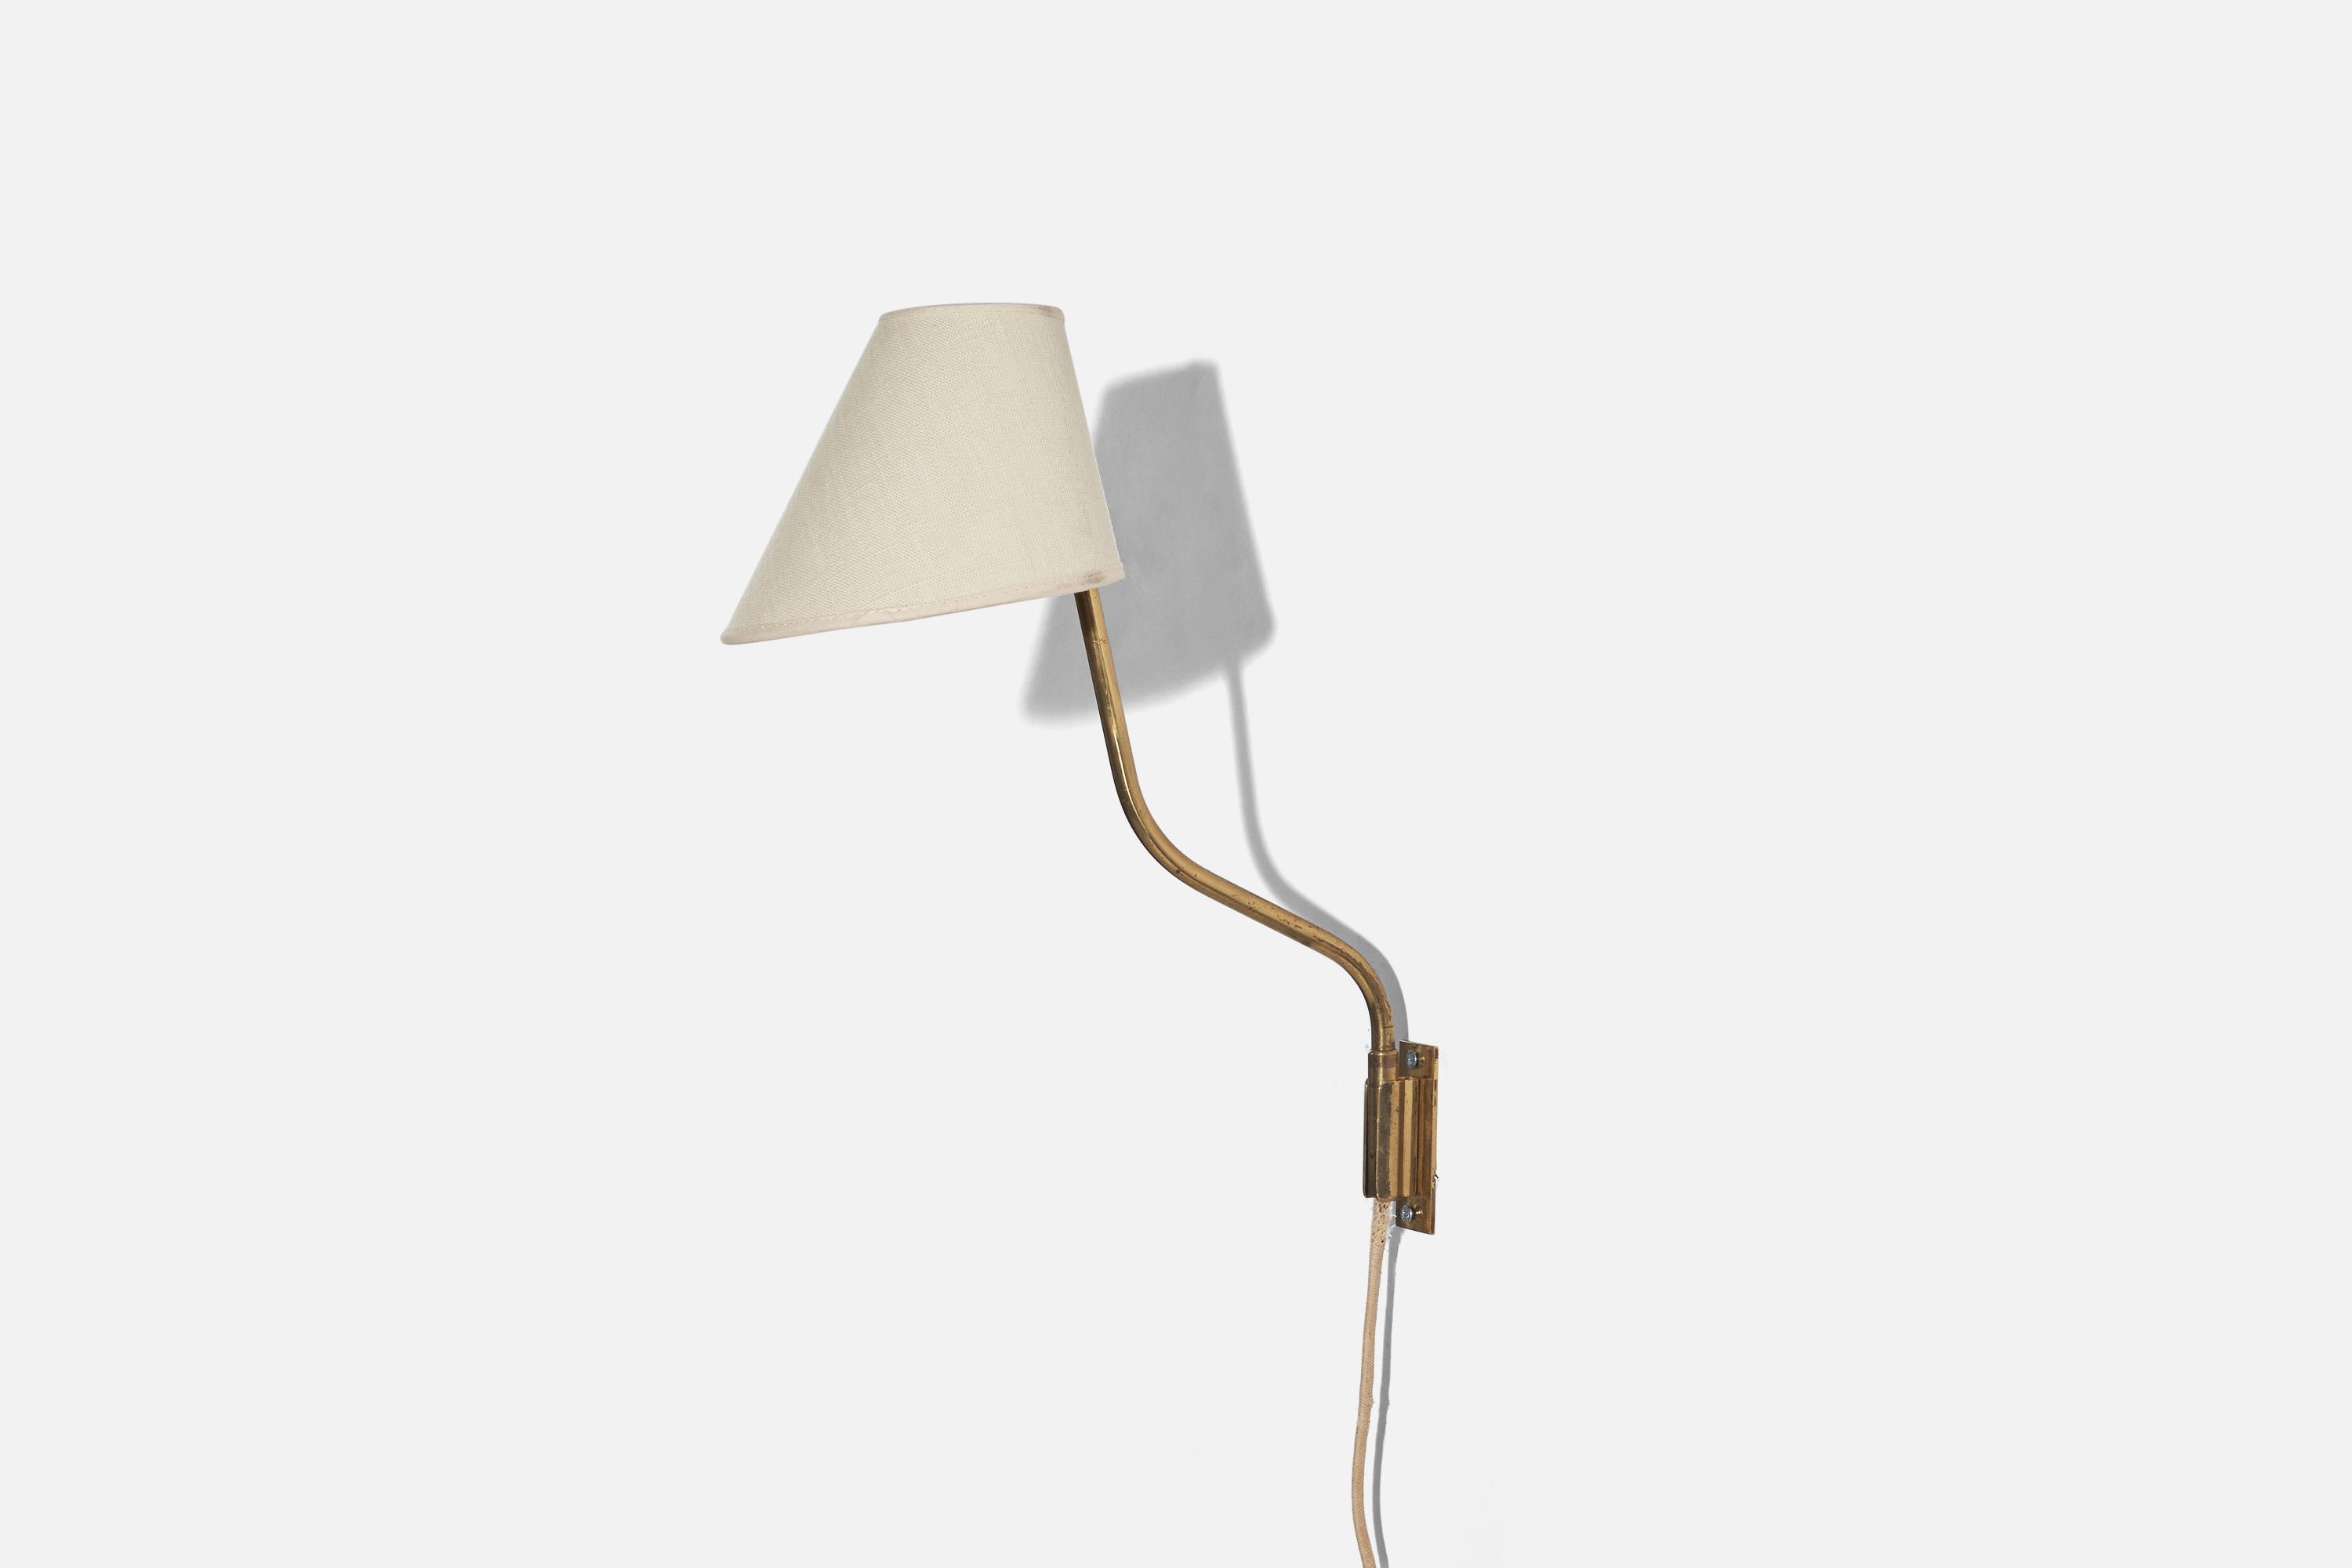 A fabric and brass sconce designed by Lisa Johansson-Paper and produced by Ornö, Finland, 1950s.

Dimensions of back plate (inches) : 3.14 x 1.05 x 0.95 (Height x Width x Depth).